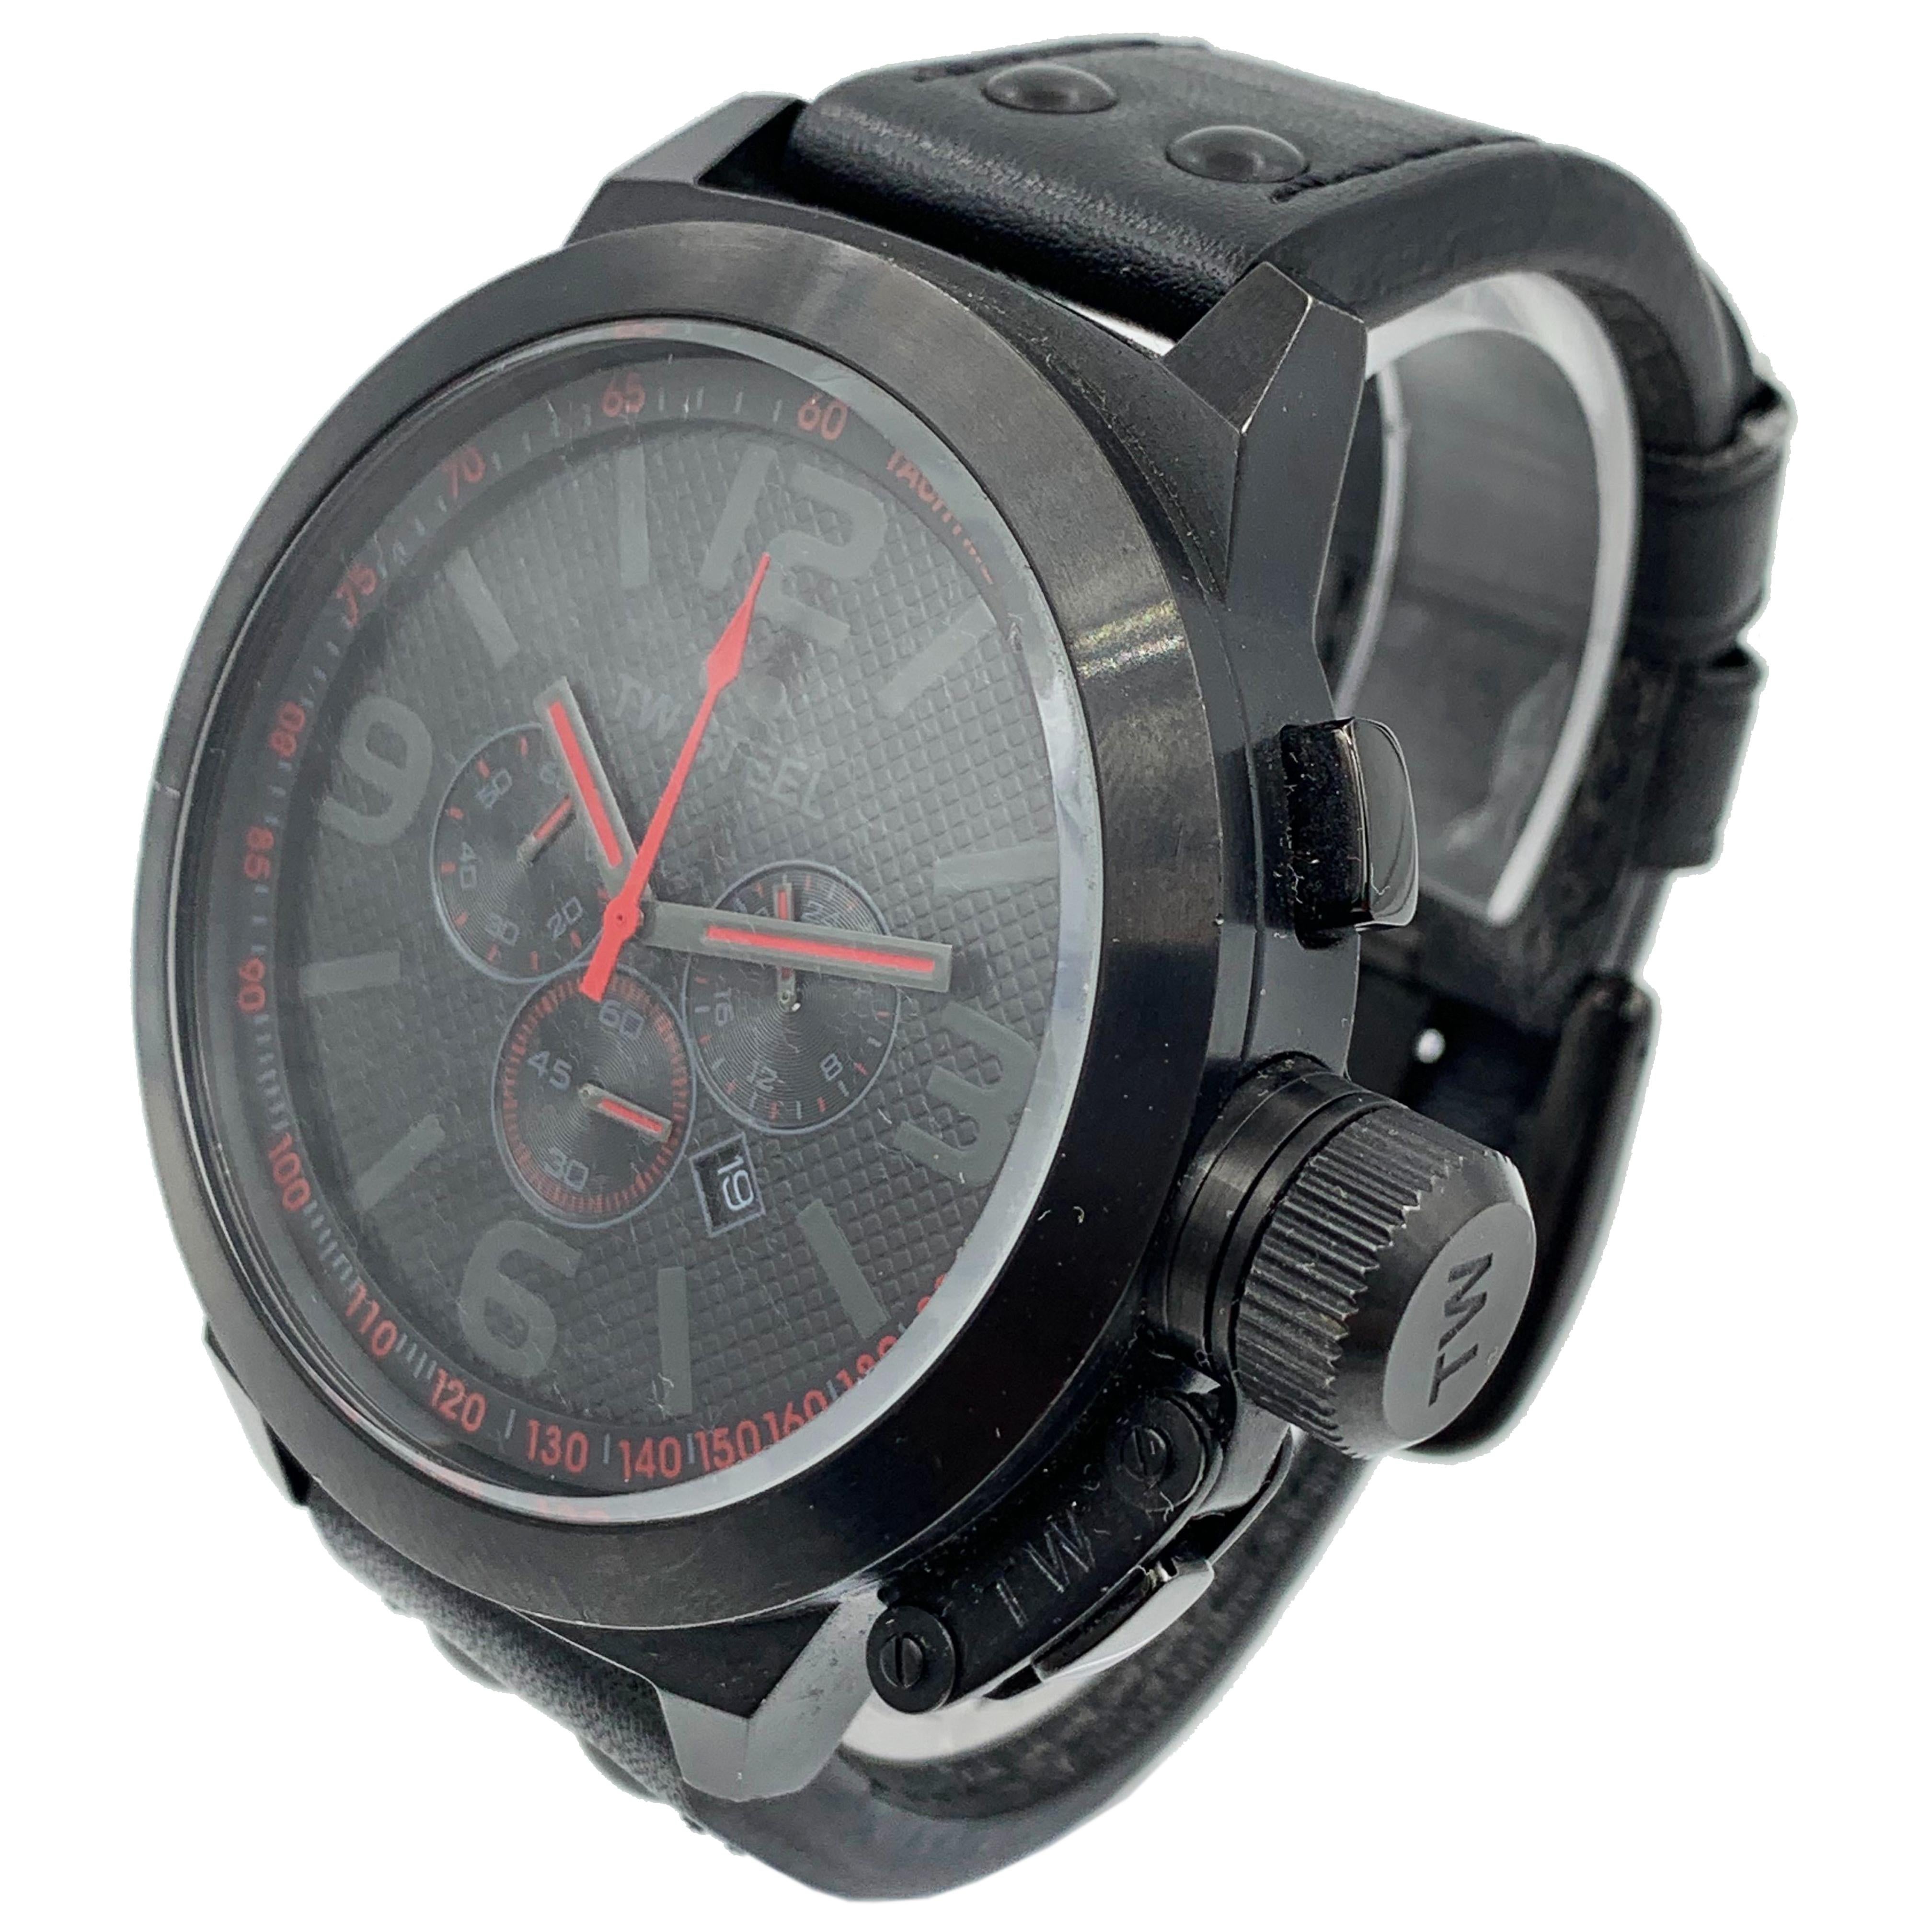 Quartz movement
Durable mineral crystal protects watch from scratches
Case diameter: 50 mm
Metal case
Water resistant to 330 feet (100 M): suitable for snorkeling, as well as swimming, but not diving
